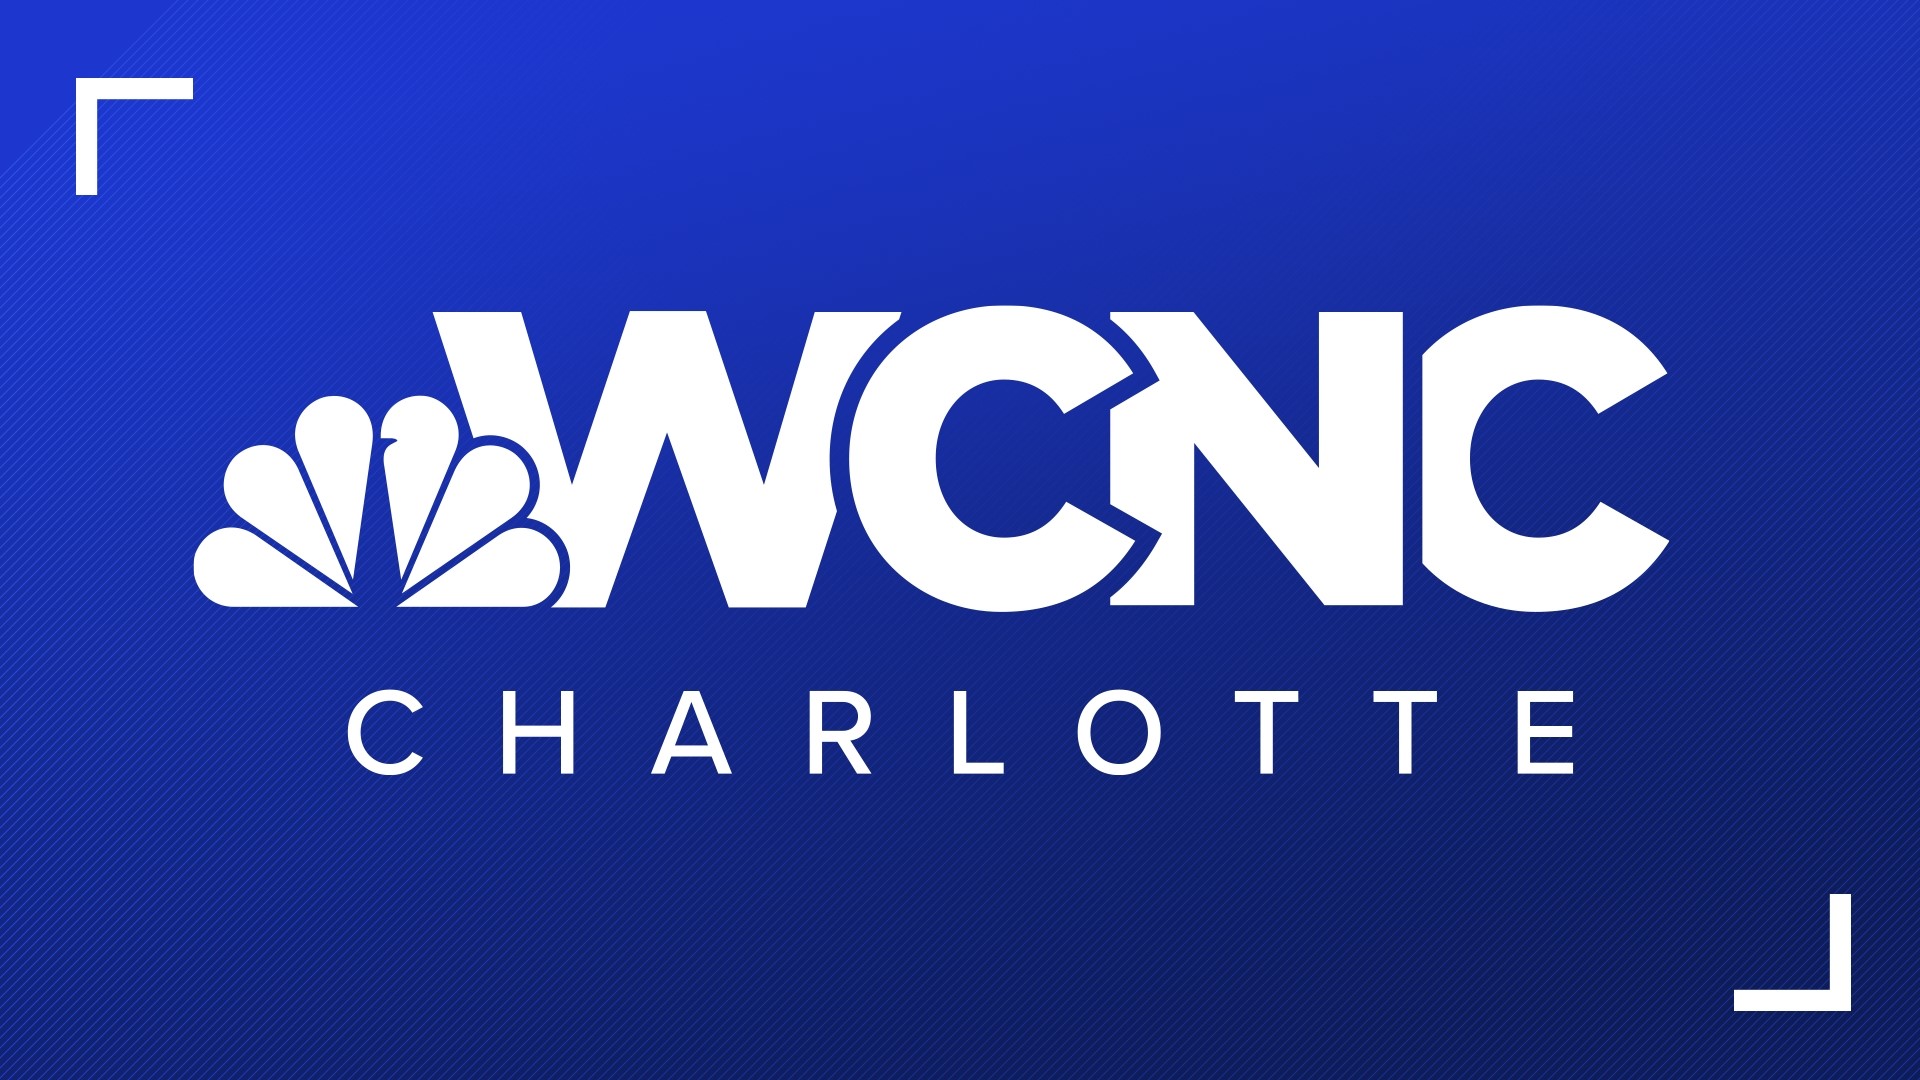 The latest news and weather from WCNC Charlotte.